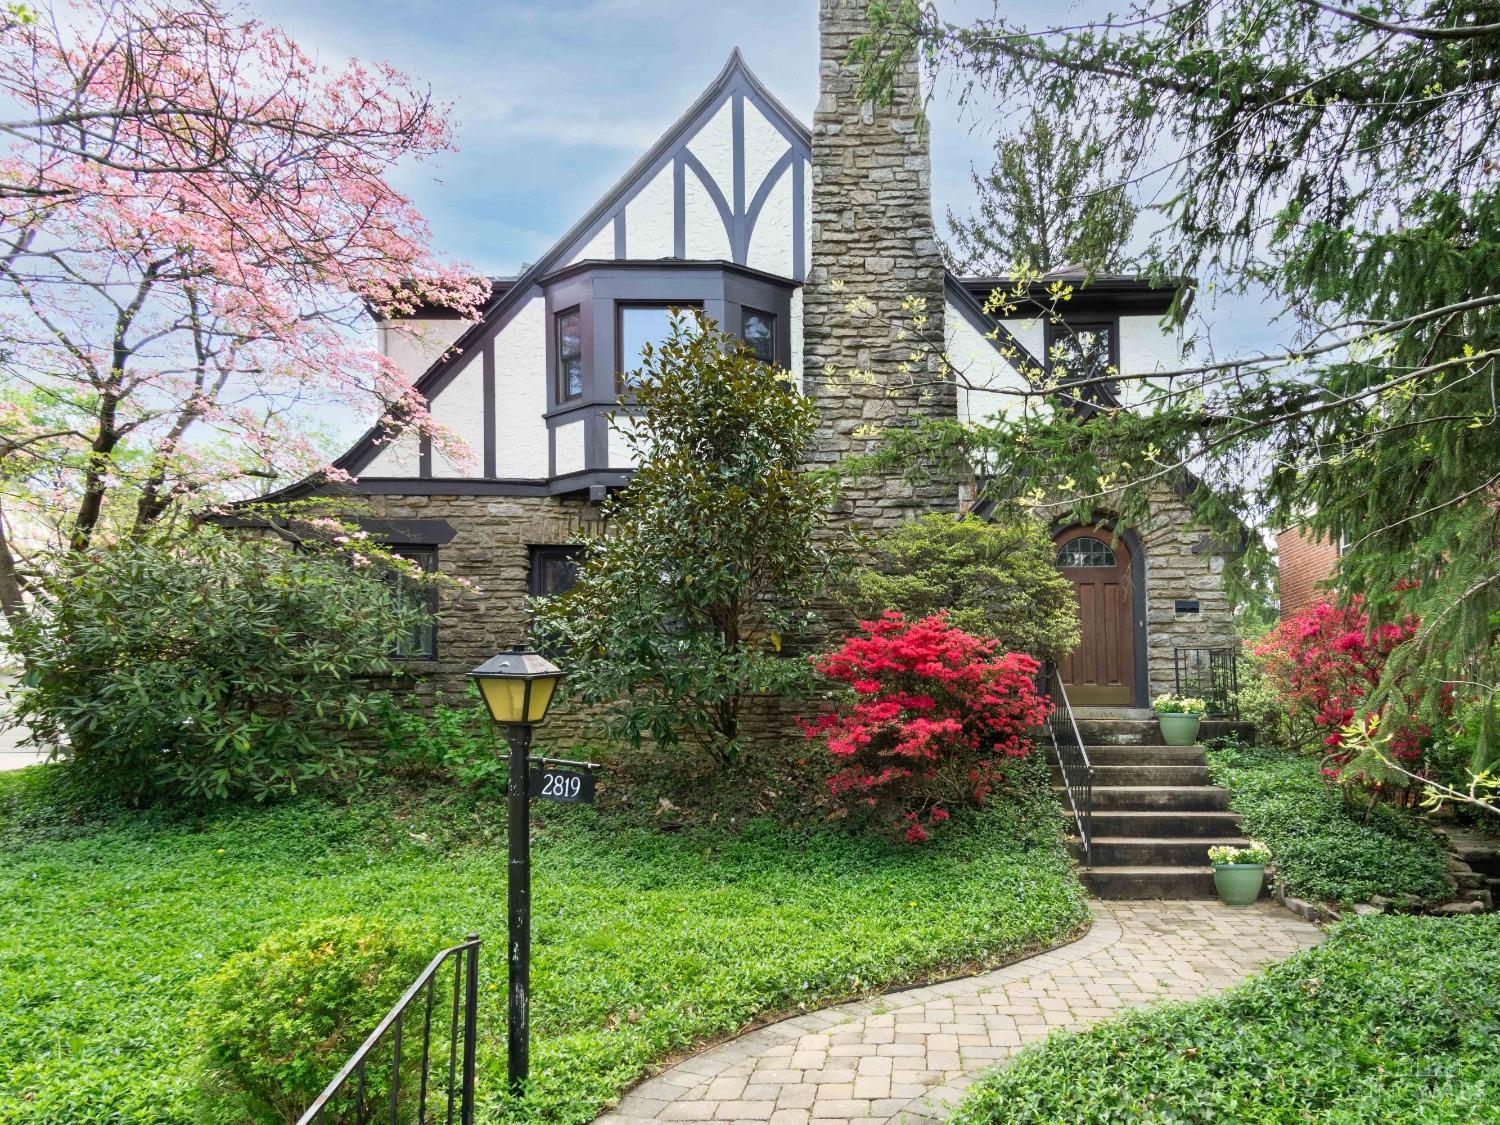 So much to love about this Hyde Park Tudor! Light filled living room features a beamed ceiling and stunning stone fireplace. First floor study with views of beautiful flowering trees. Large eat in kitchen with counter bar walks out to private deck. Four spacious bedrooms, wood floors, first floor laundry, newer windows, high ceilings, Walk to Hyde Park Square